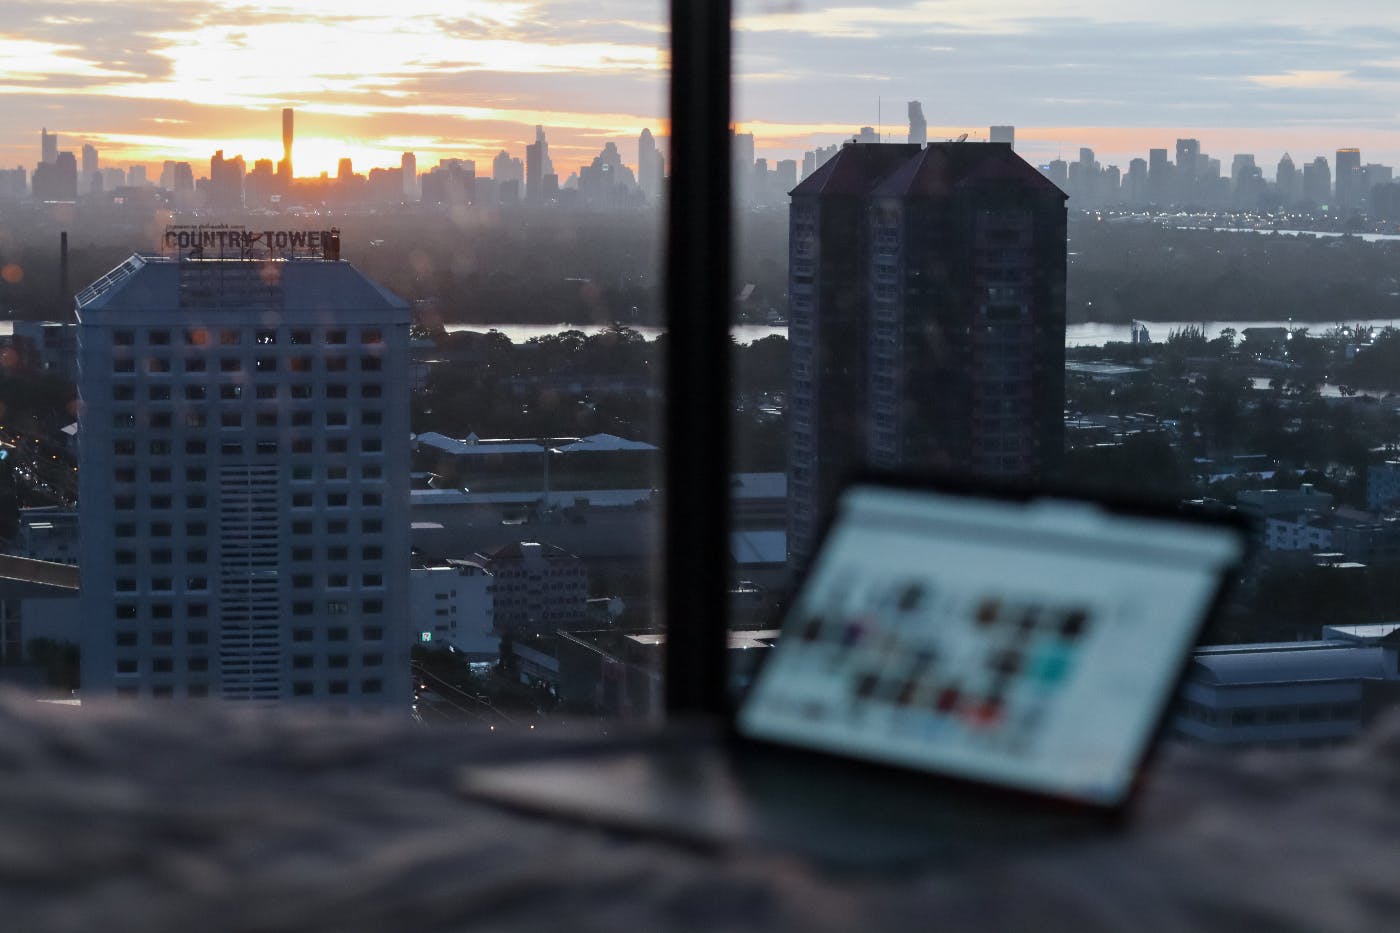 The view from a window of a city and a laptop in the forground.